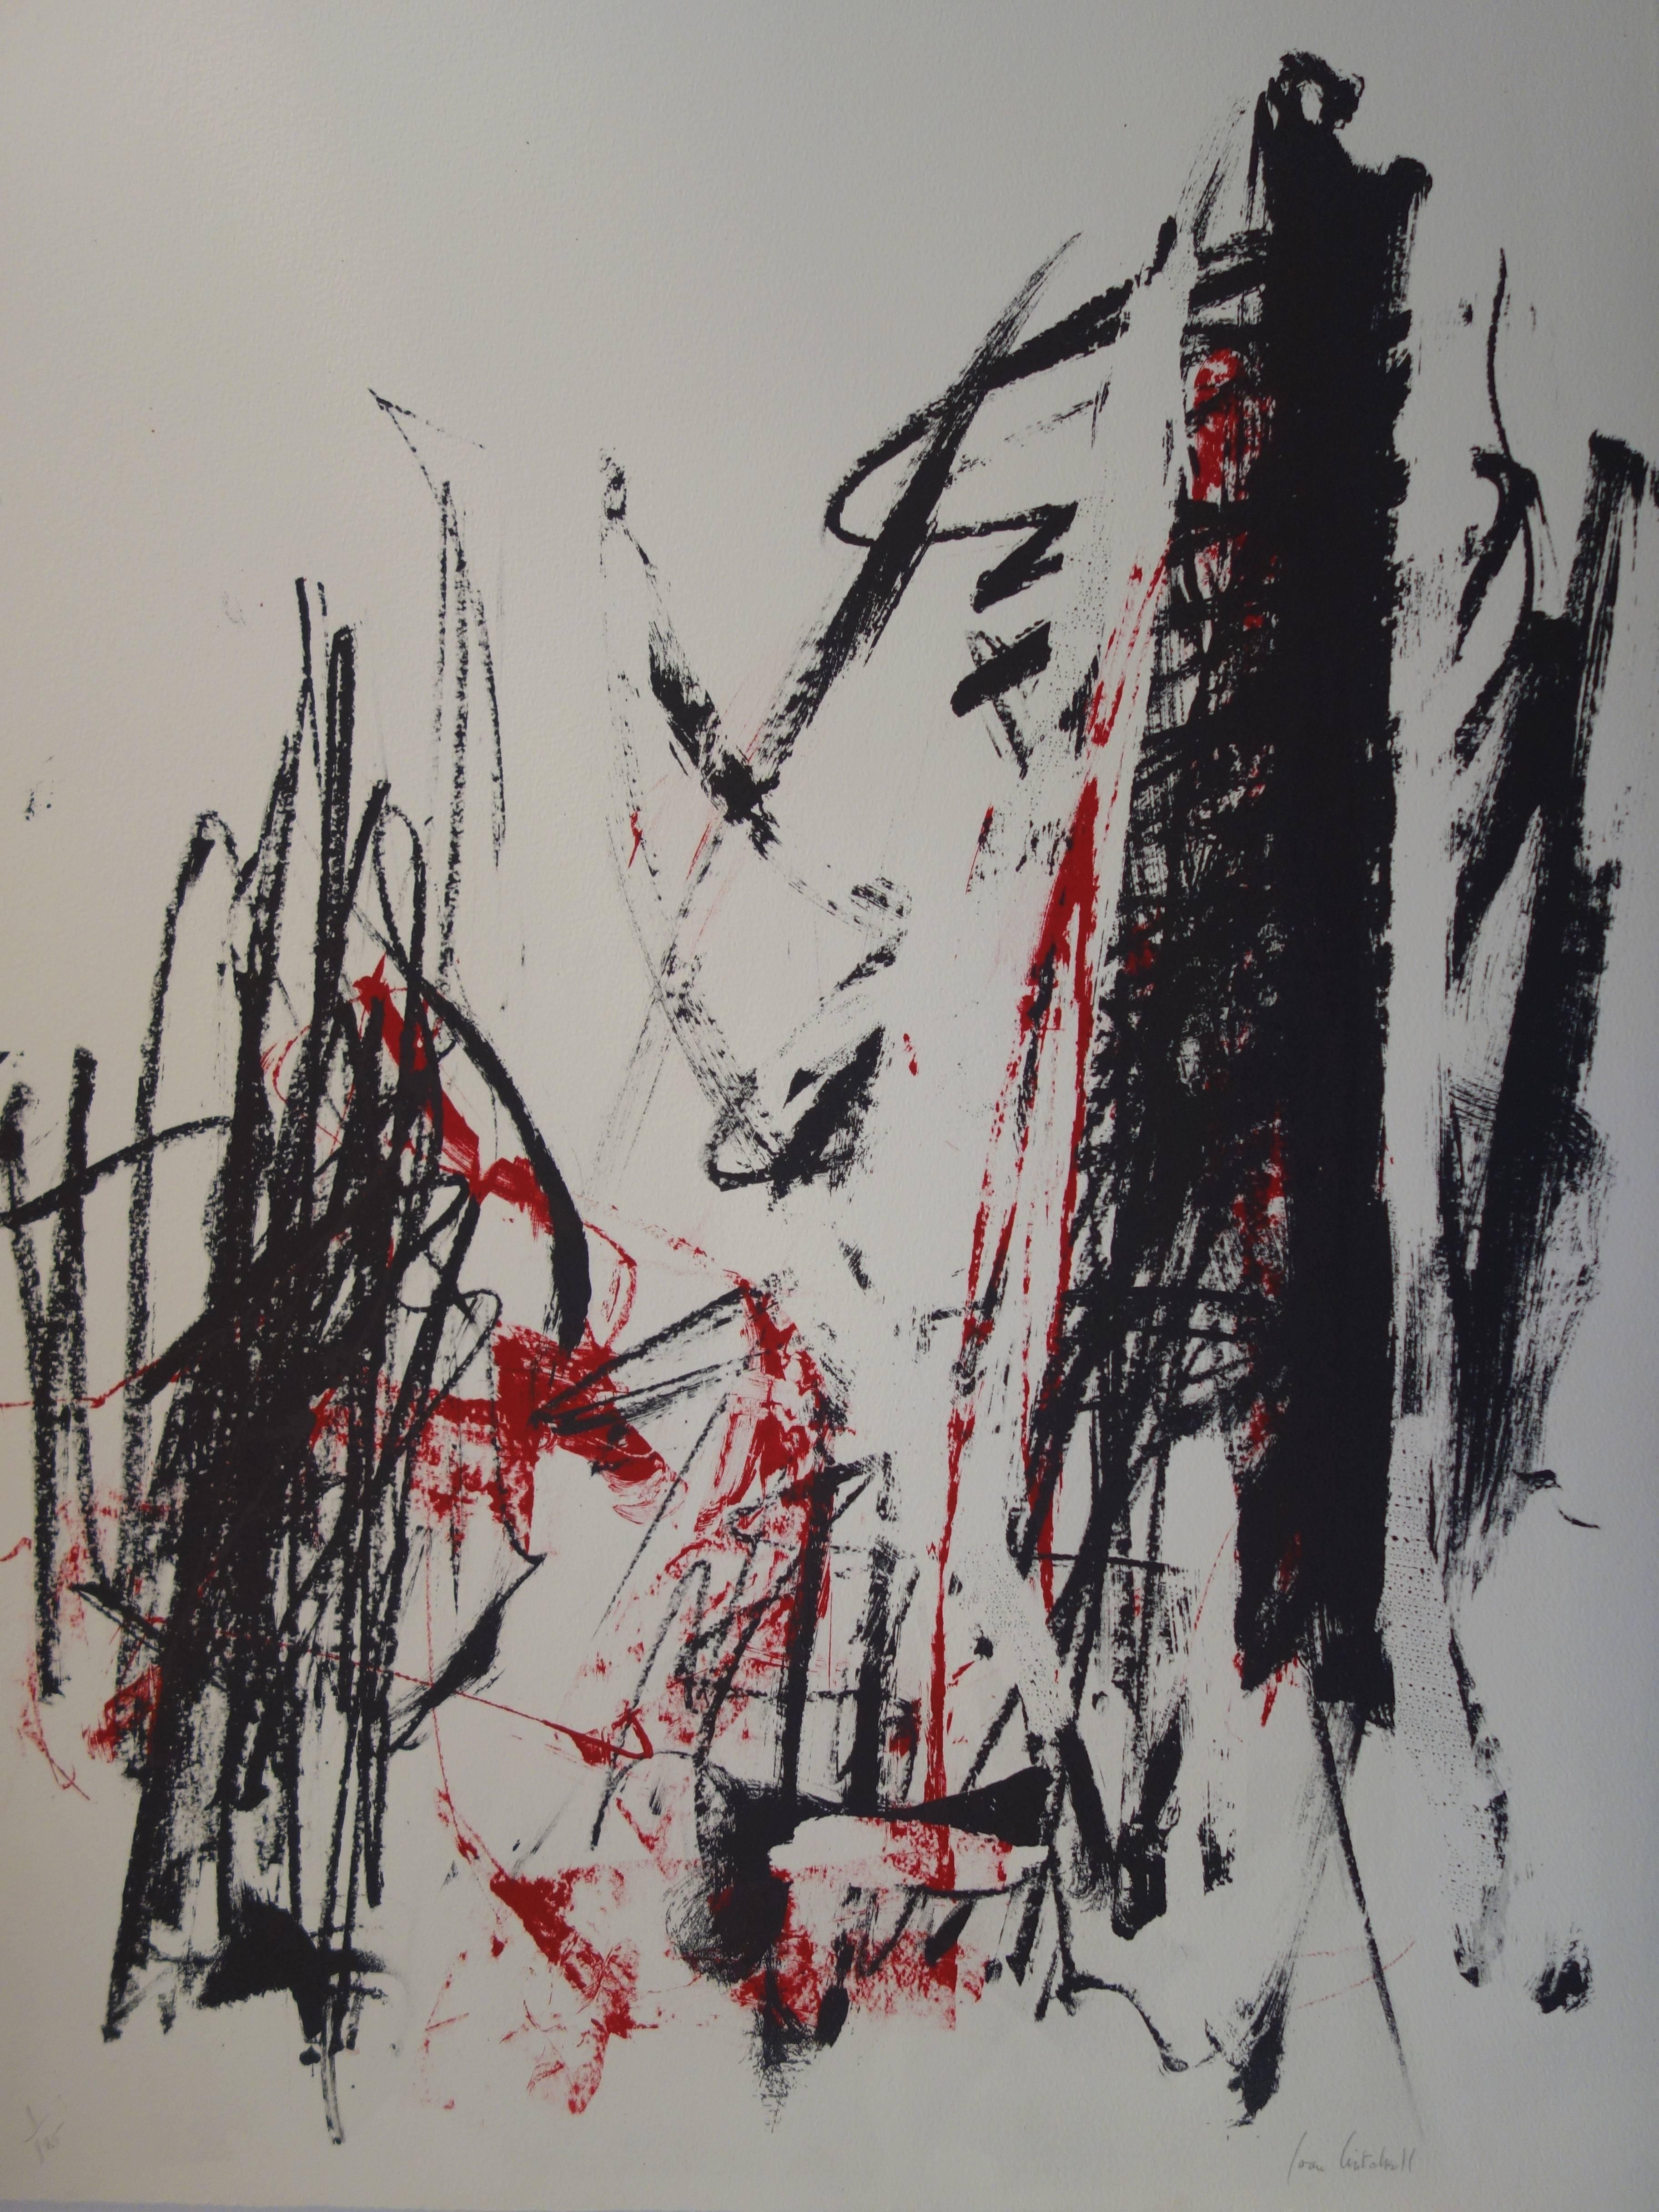 Joan MITCHELL
Trees in red (c. 1990)

Original lithograph
Pencil signed
Limited to 125 copies pencil numbered - Here the very look for copy 1/125
On Arches Vellum 76 x 56 cm (c. 22x30